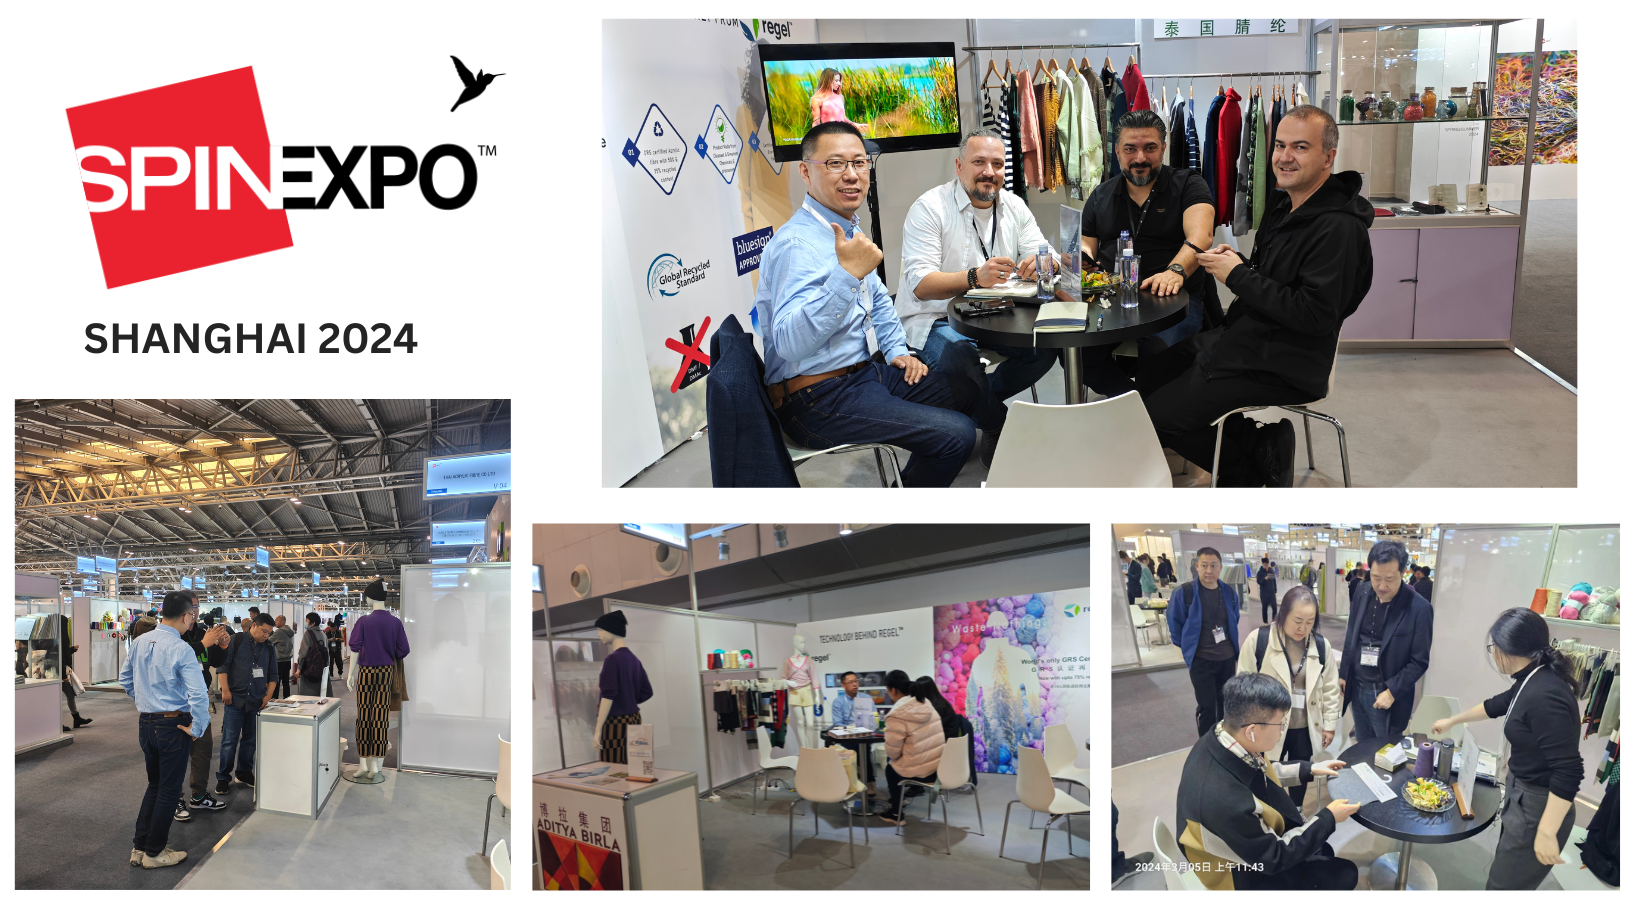 TAF Participated in SPINEXPO™ Shanghai 2024